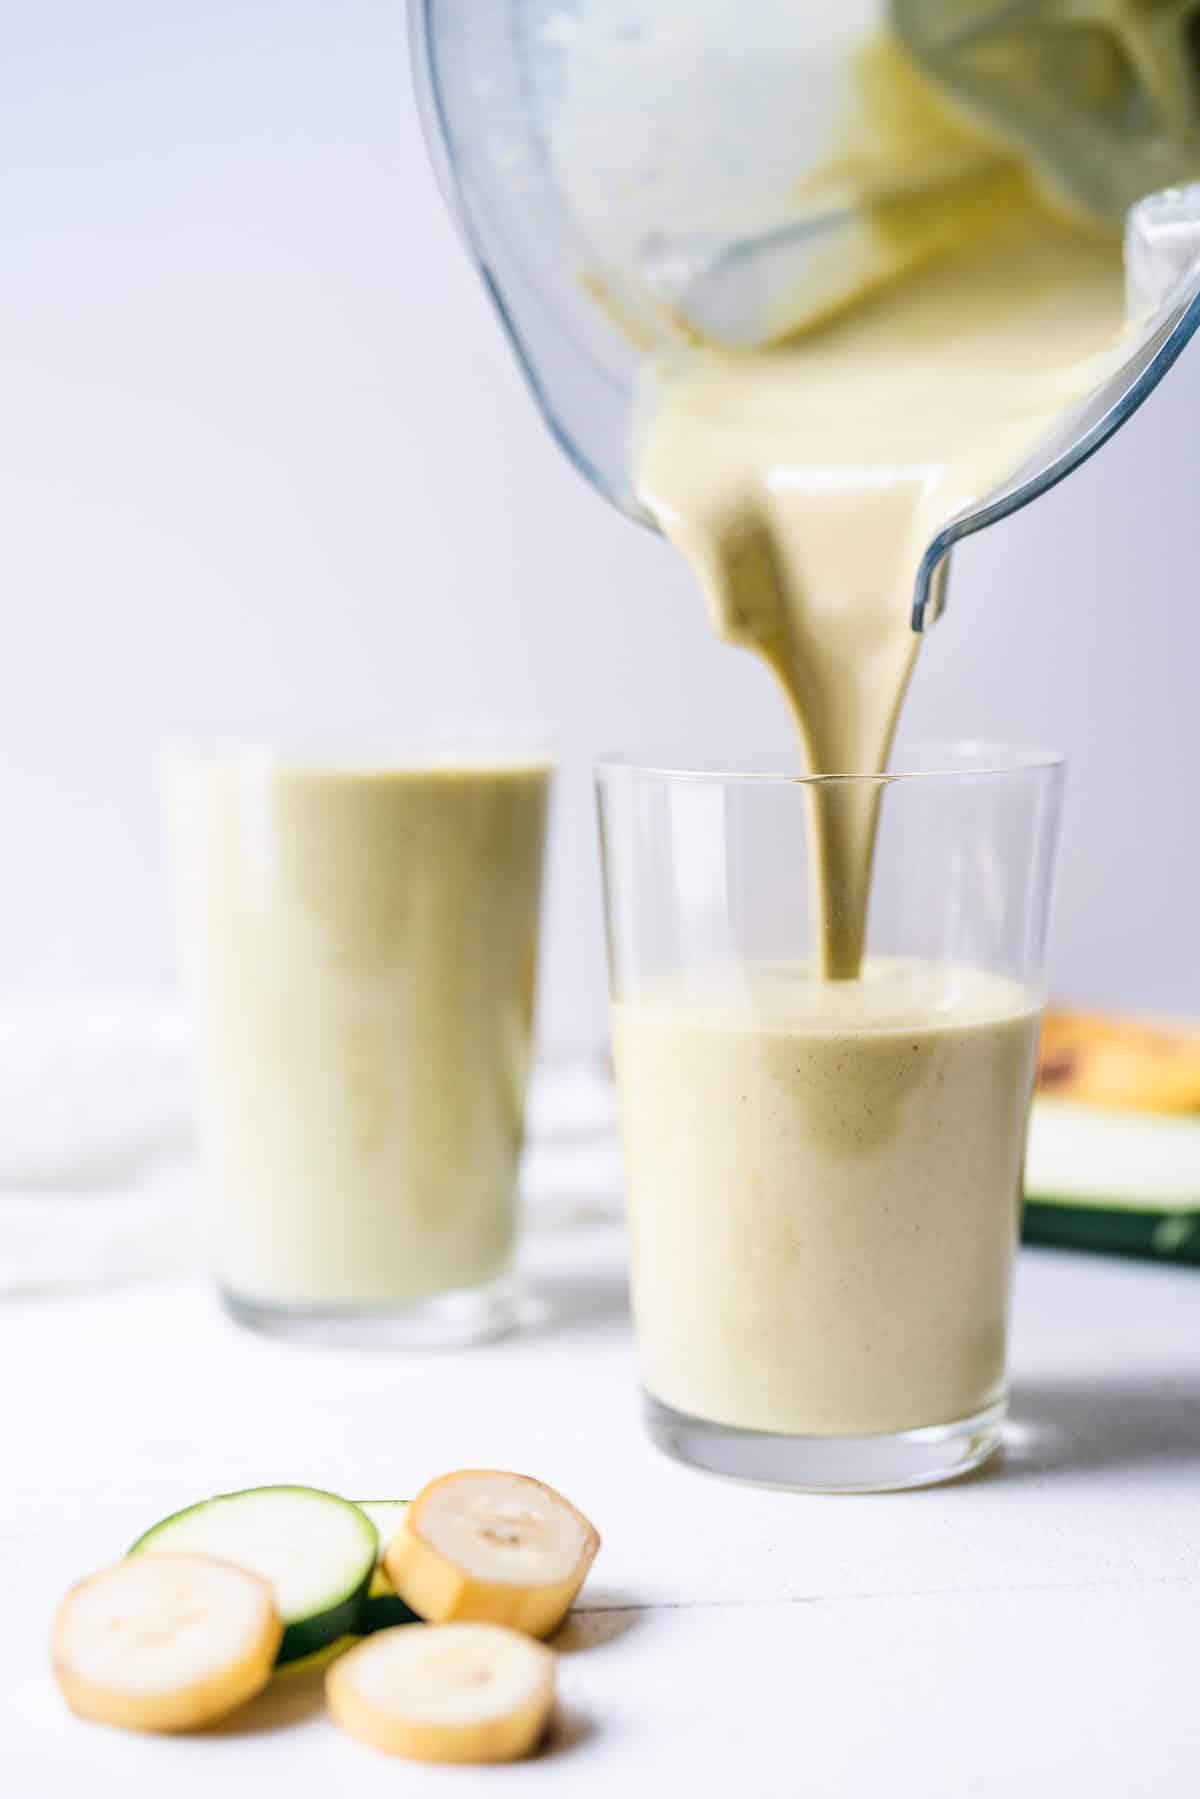 Two glasses being filled with a green smoothie with sliced bananas in the front.